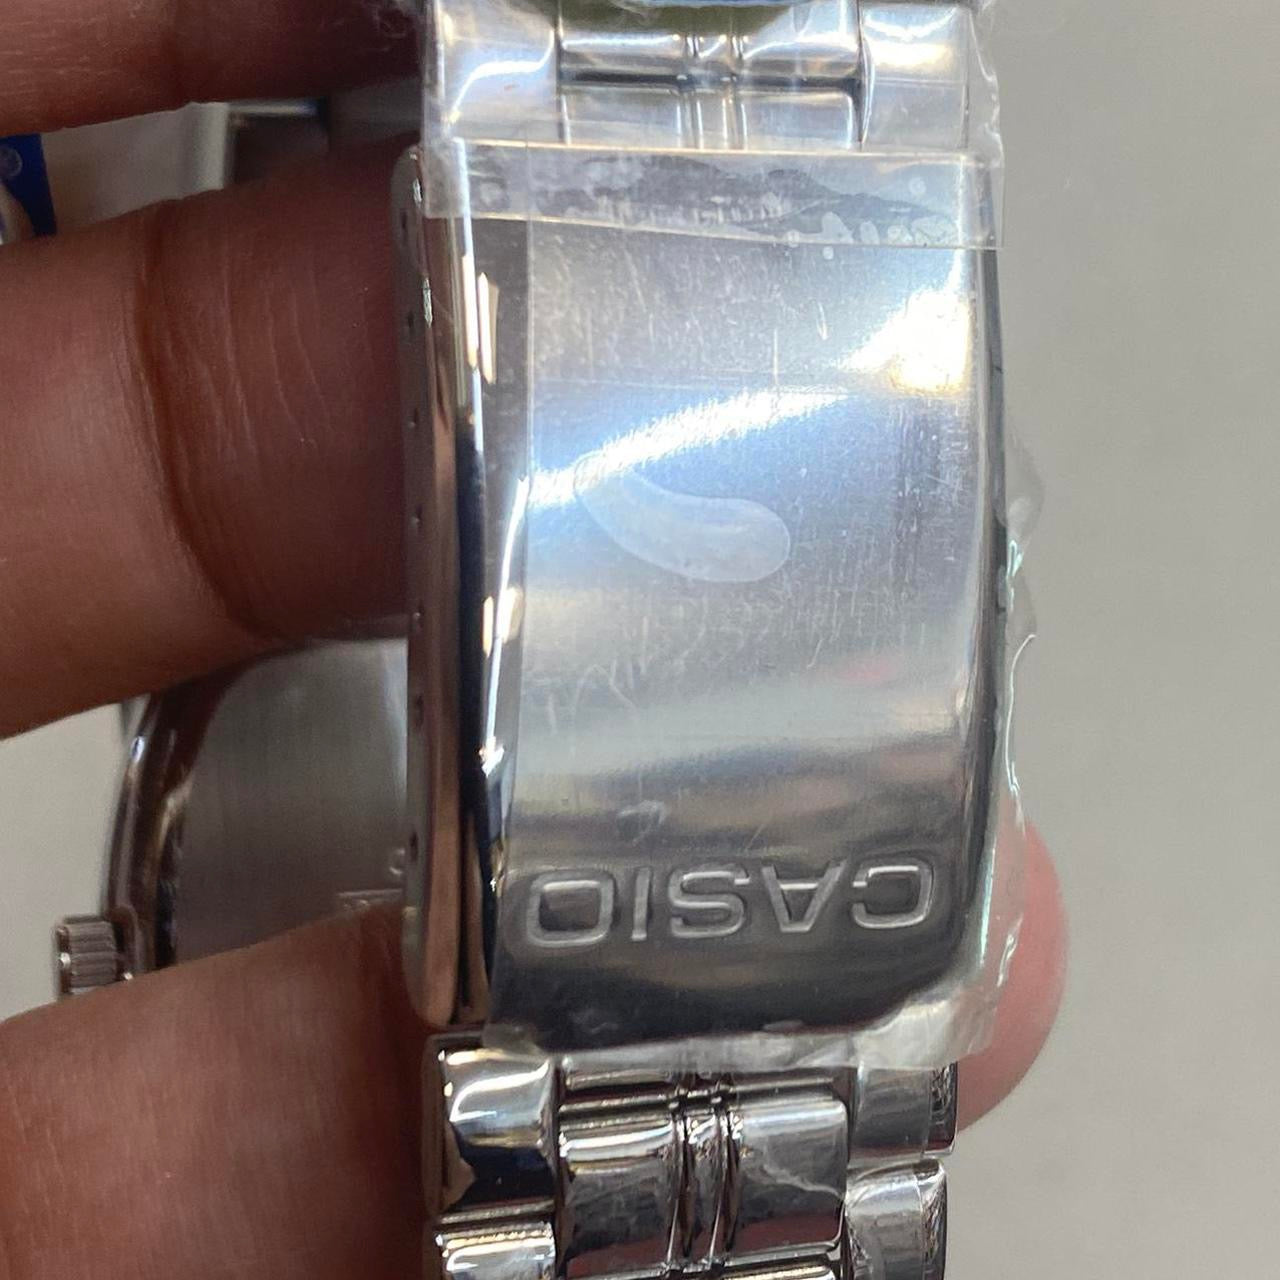 Casio&nbsp; Brand Watch for&nbsp; Ladies or for Young TEEN , Medium Size 30mm Diameter,&nbsp;  Made of Strong Stainless Steel Material&nbsp;  Fits up to 8 inches Round LONG&nbsp;  Brand New Battery Installed Inside&nbsp;  Water Resistant&nbsp;